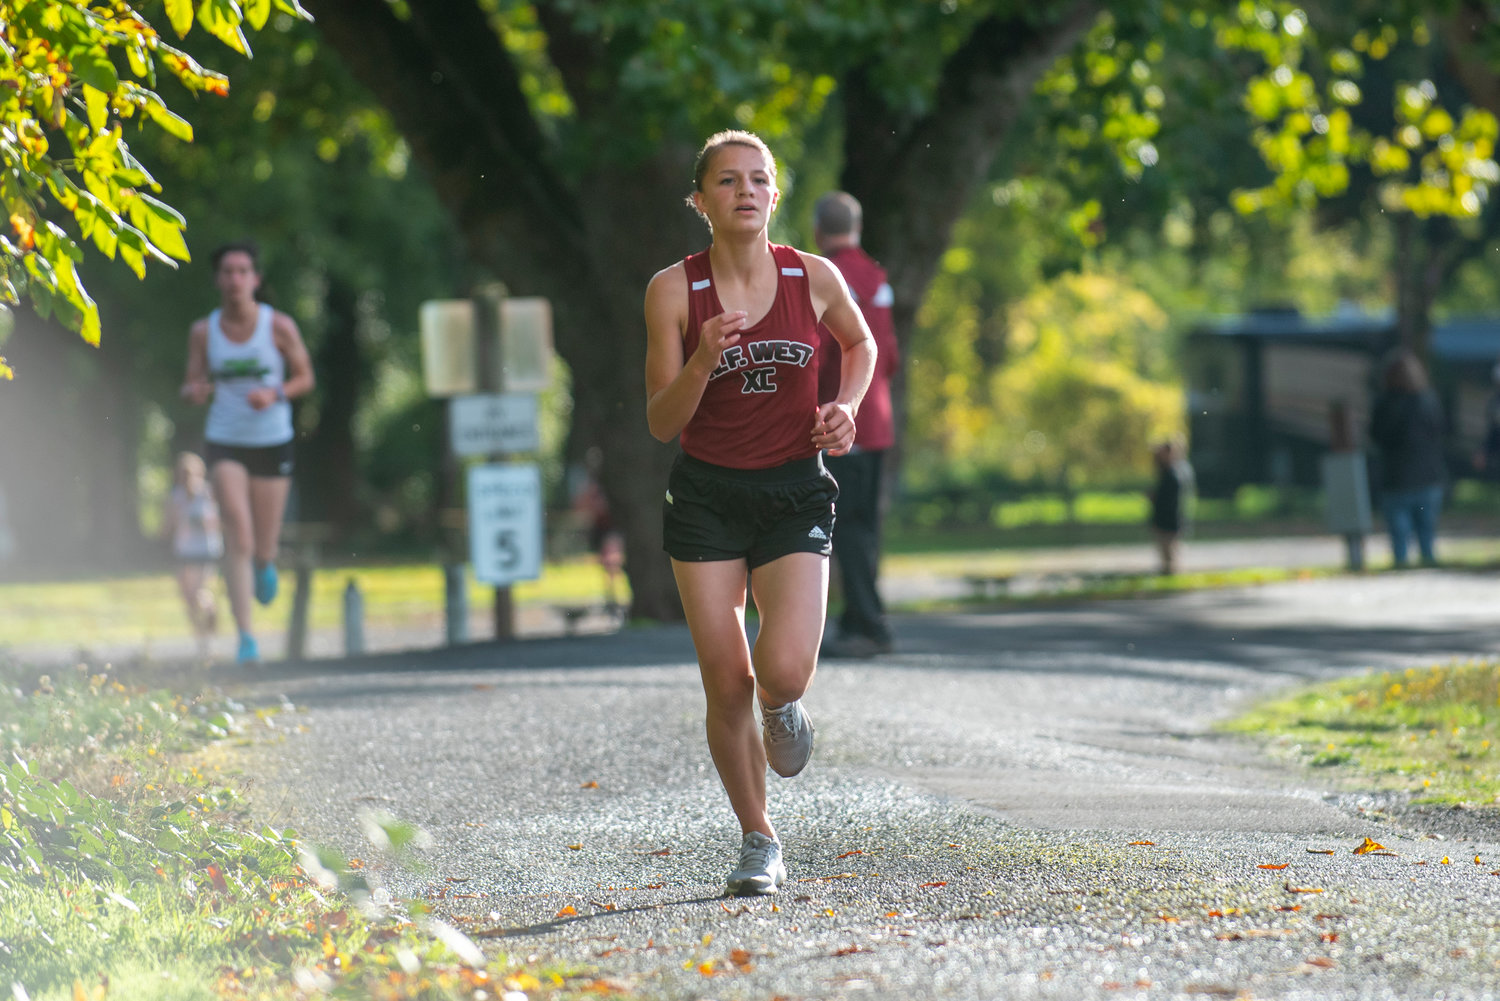 W.F. West freshman Mercedes Ricks runs the opening lap of a dual cross country meet at Stan Hedwall Park on Wednesday, Oct. 6, 2021.